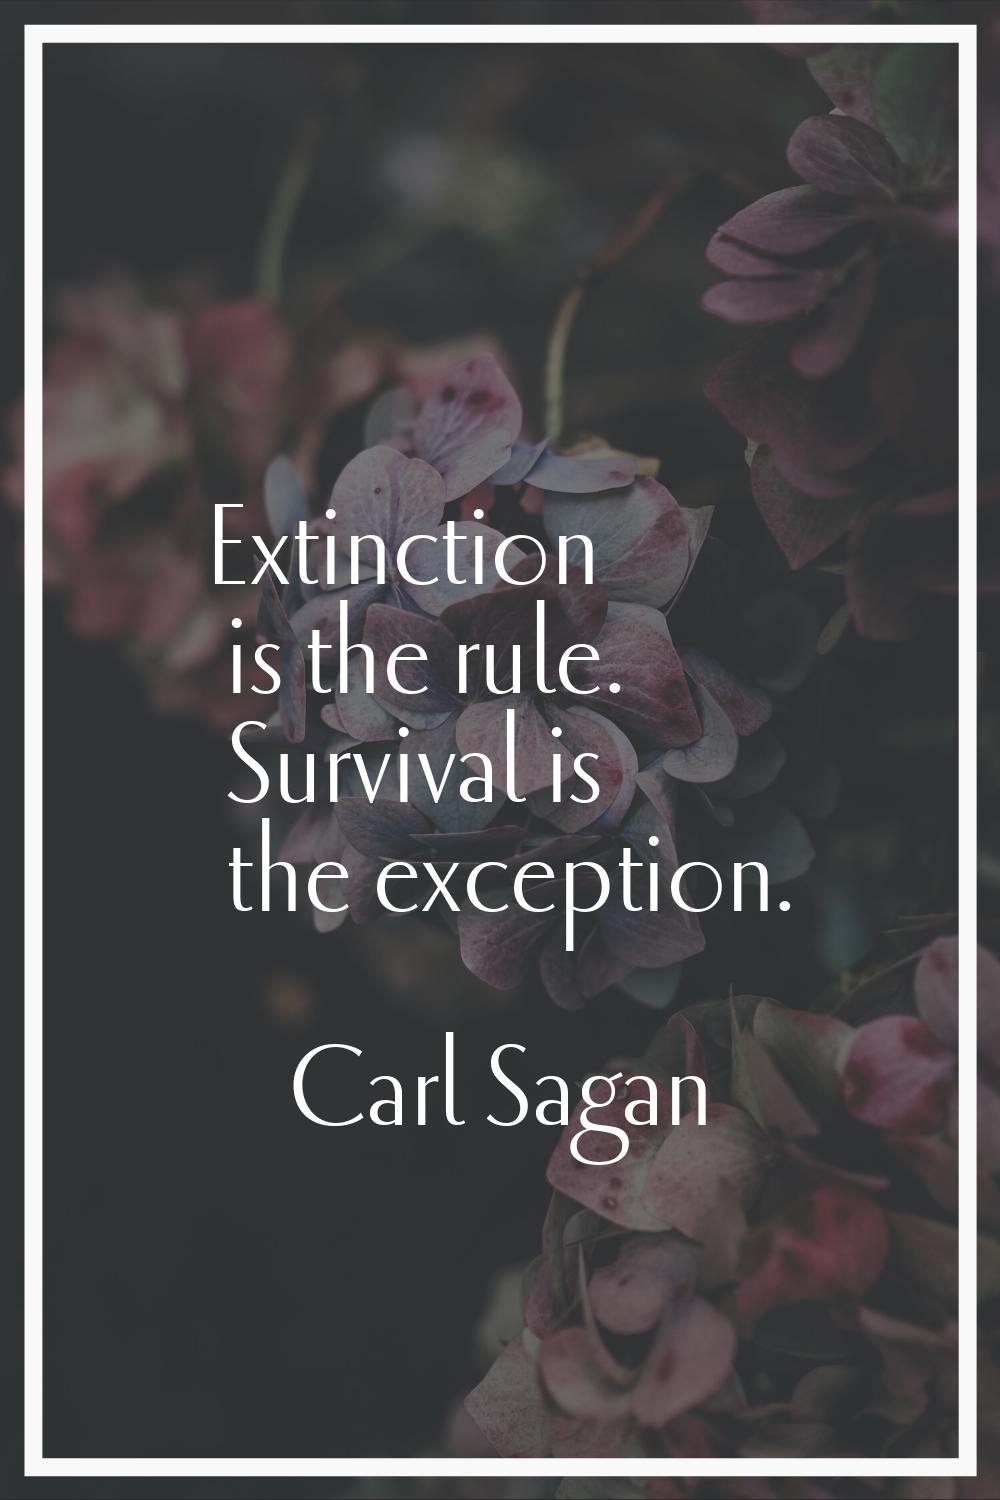 Extinction is the rule. Survival is the exception.